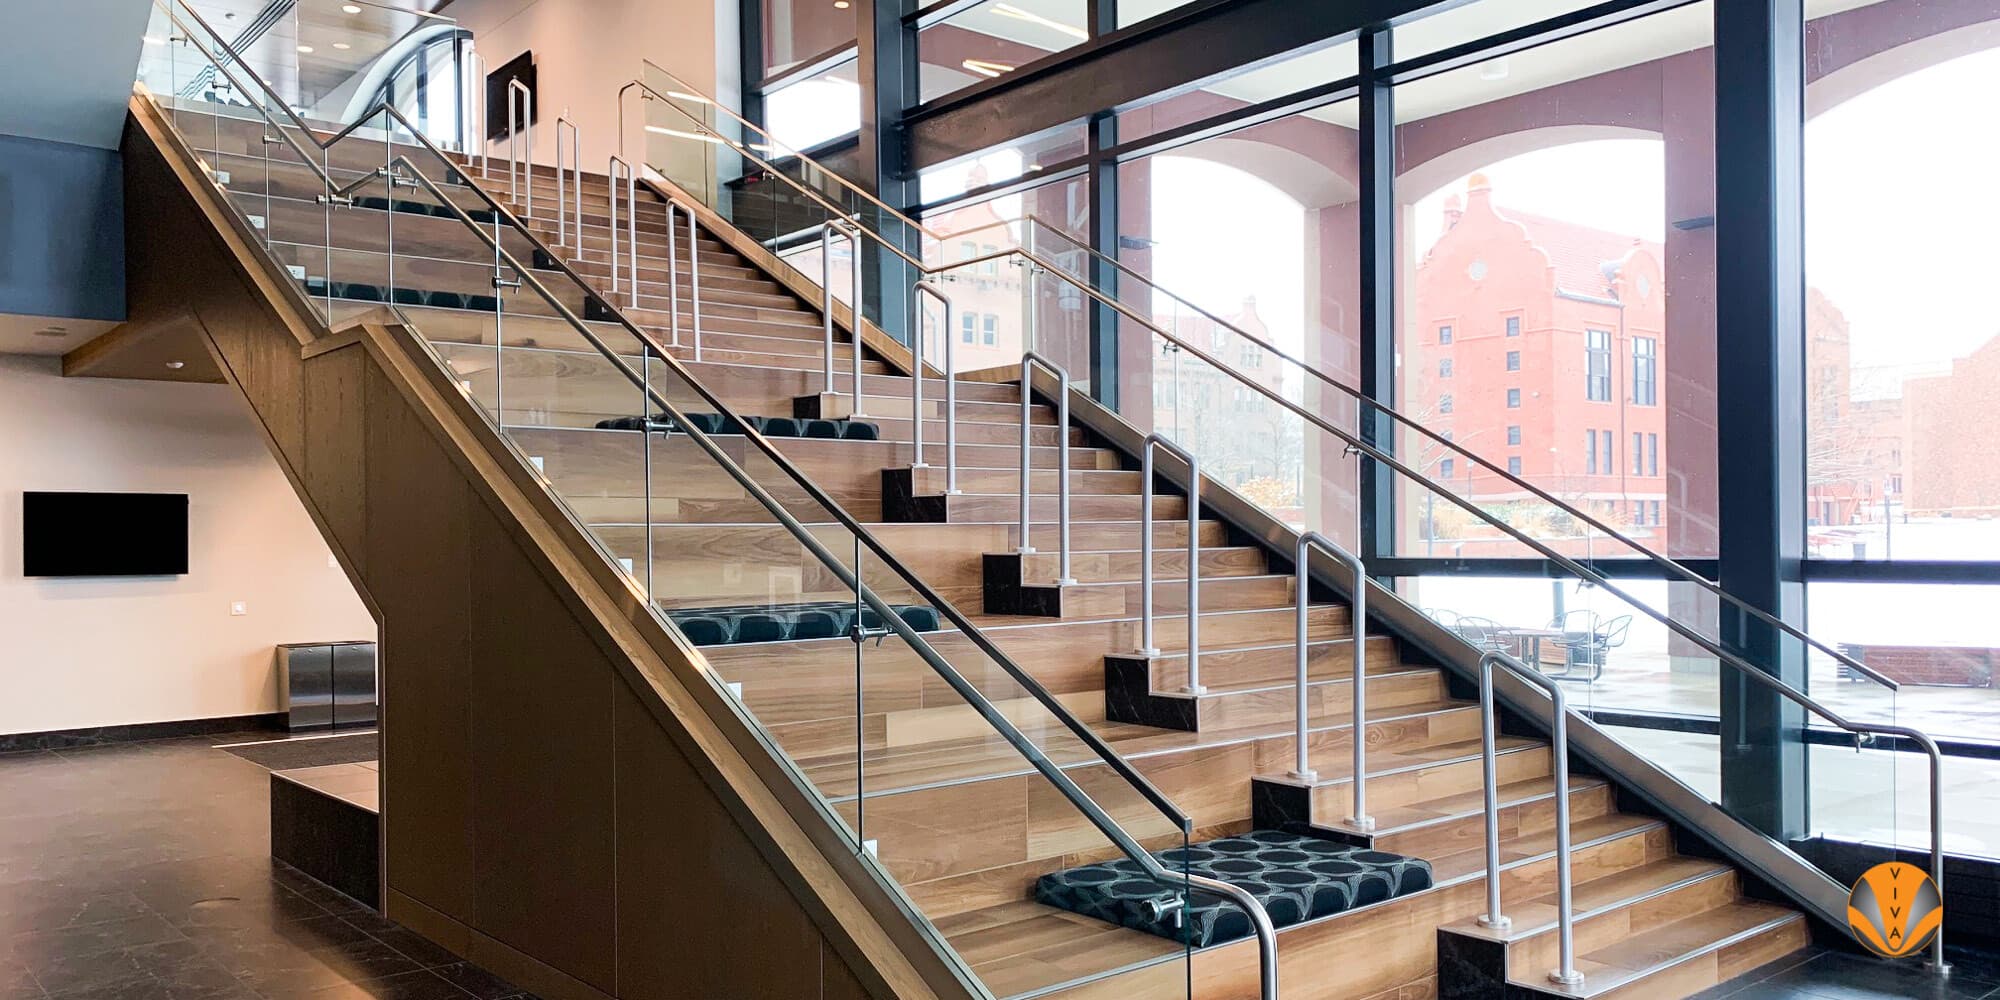 SHOE Structural Glass Railing System and FSR at Millikin Center for Theatre & Dance in Decatur, IL